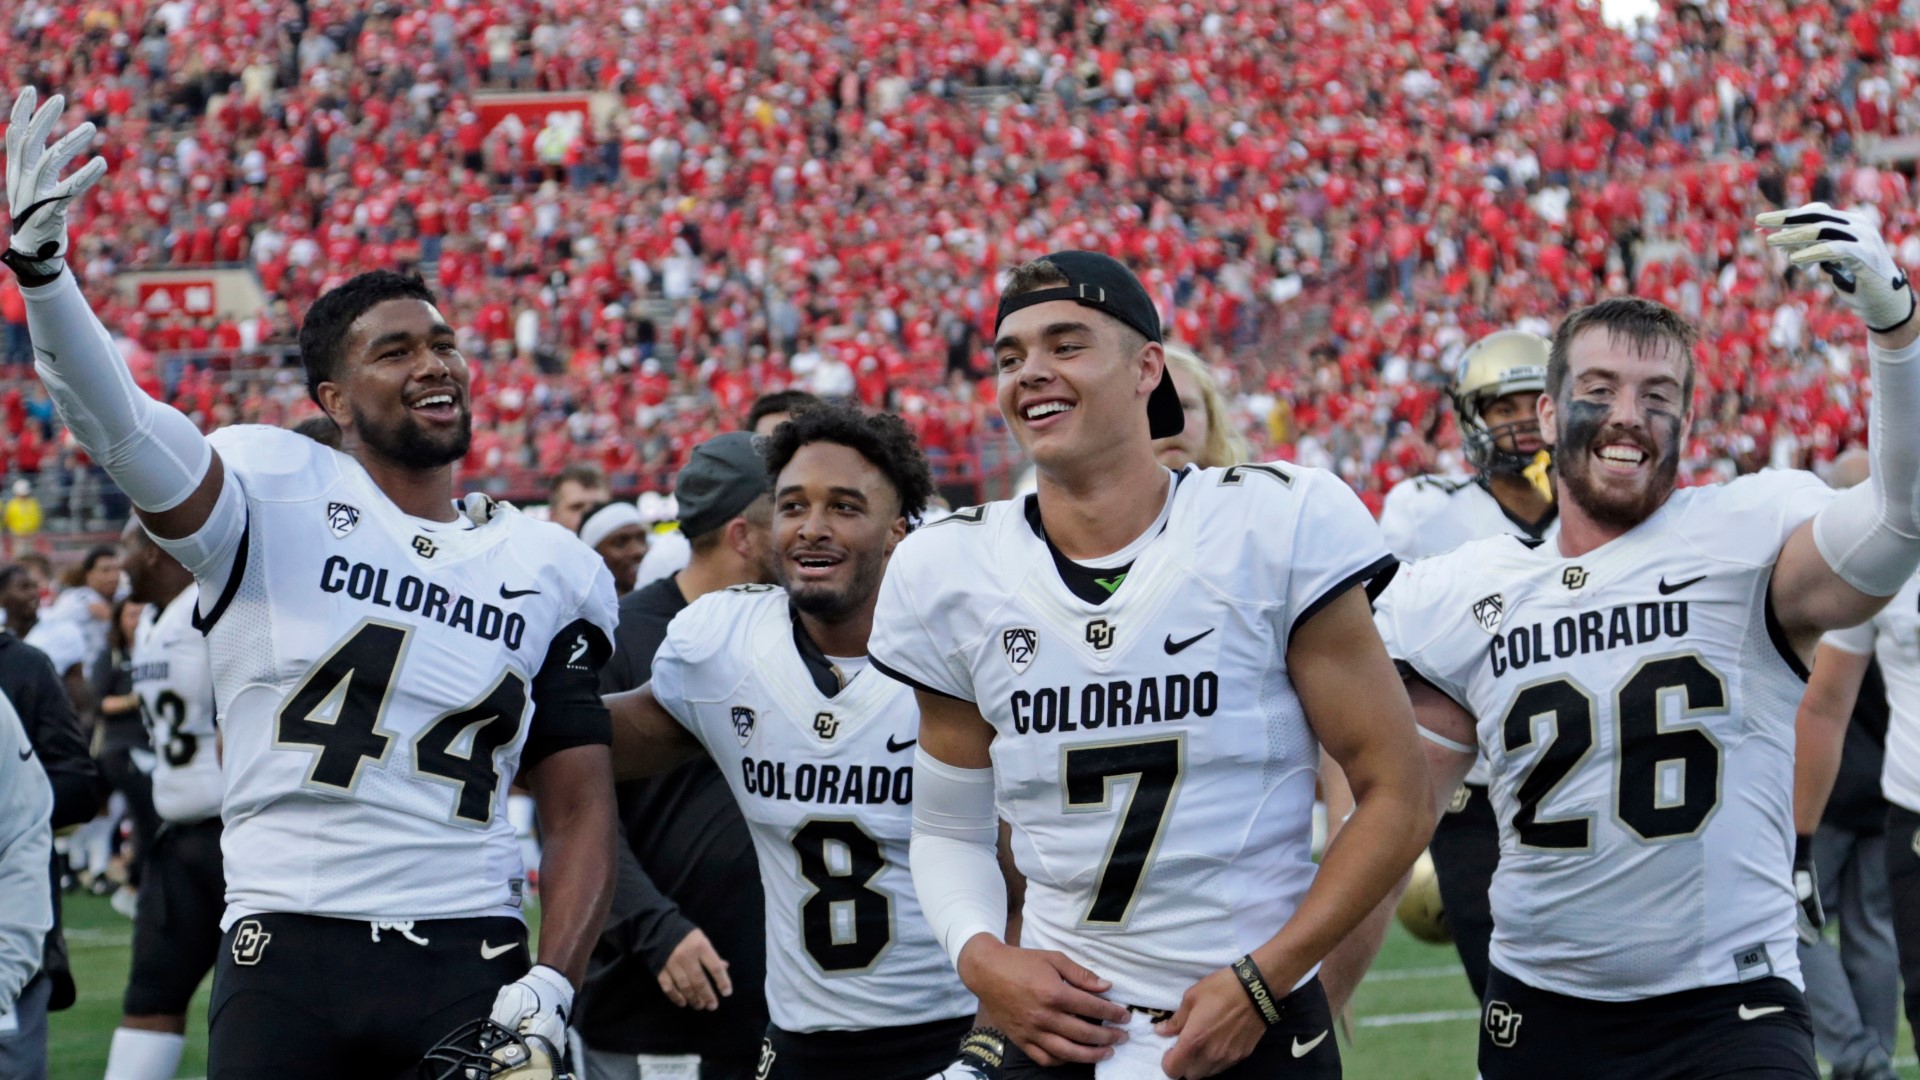 Colorado's home opener against rival Nebraska will bring record-high revenues to CU, but it will also bring an enormous amount of Husker fans.